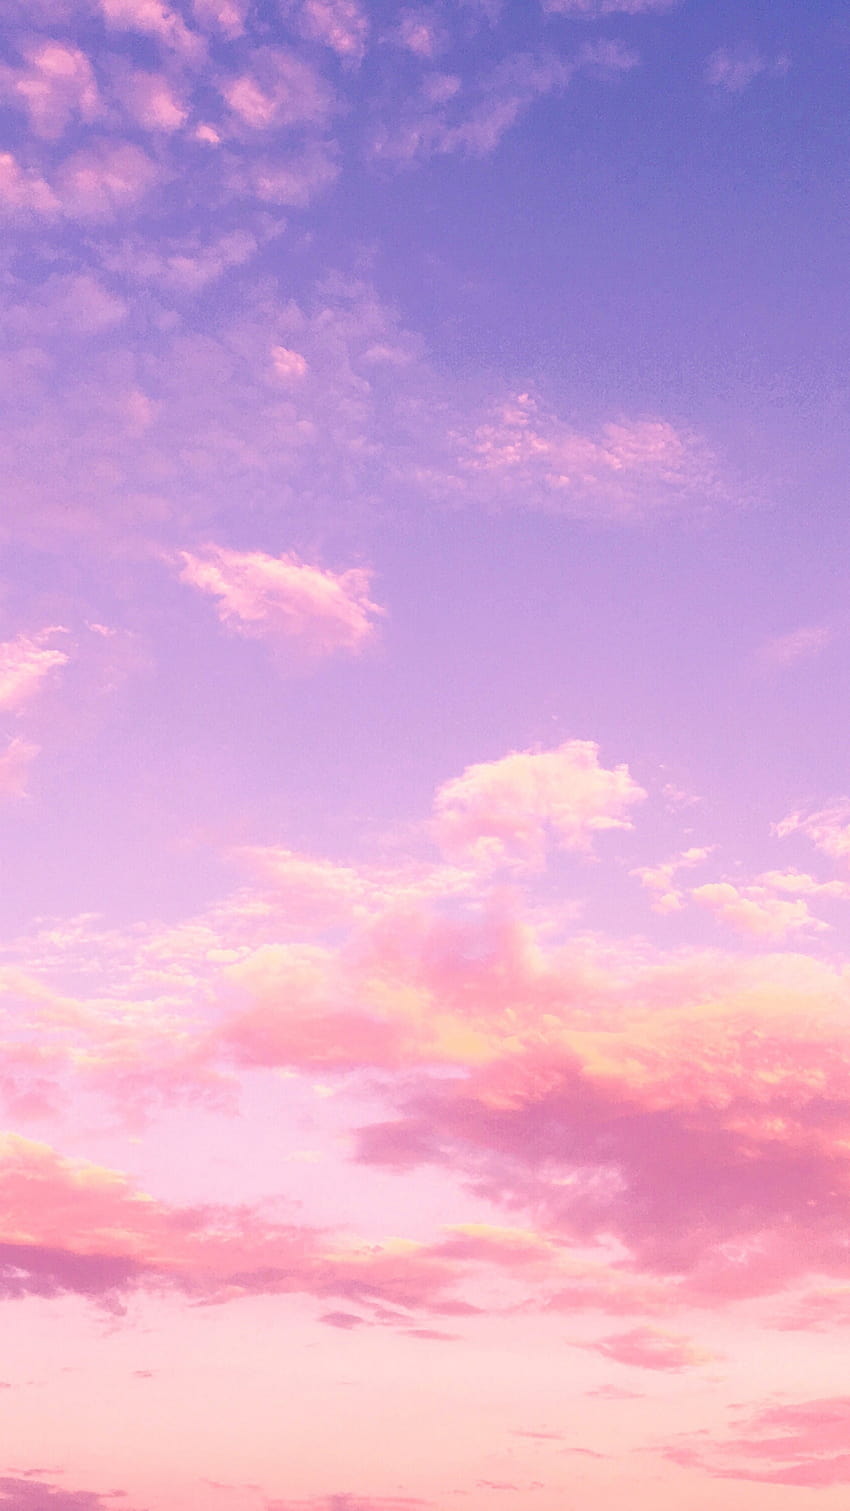 Cotton Candy Aesthetic Skies Mobile Lock Screen Screen Saver for iPhone and Android, instagram size HD phone wallpaper